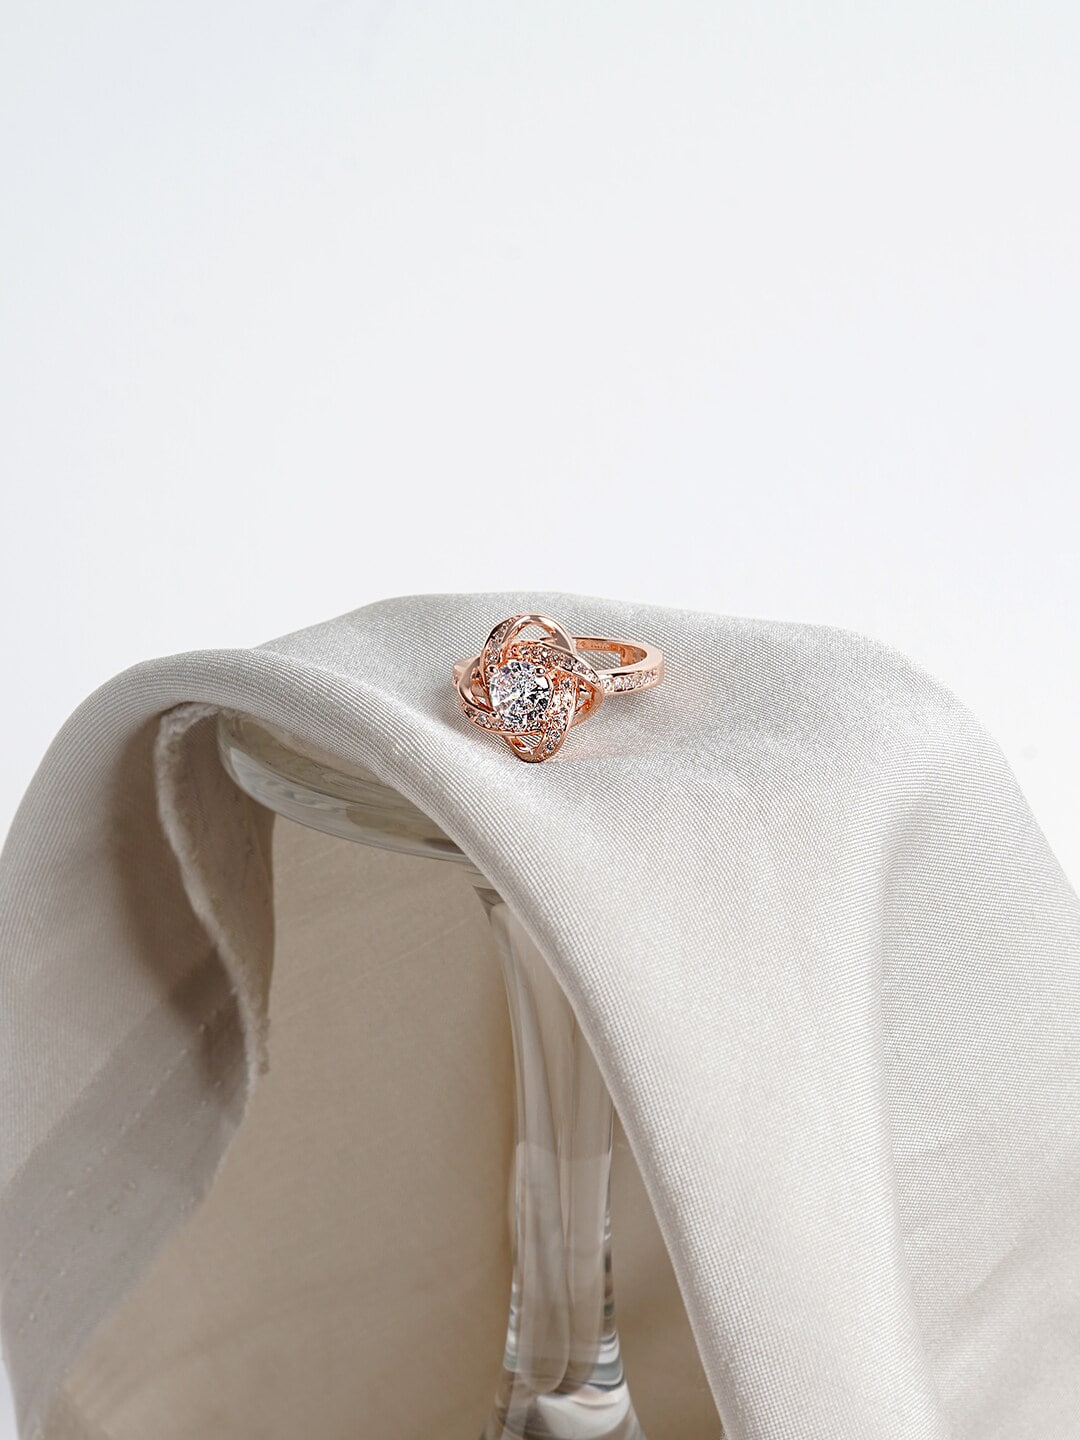 JOKER & WITCH Rose Gold-Toned White Stone-Studded Adjustable Finger Ring Price in India